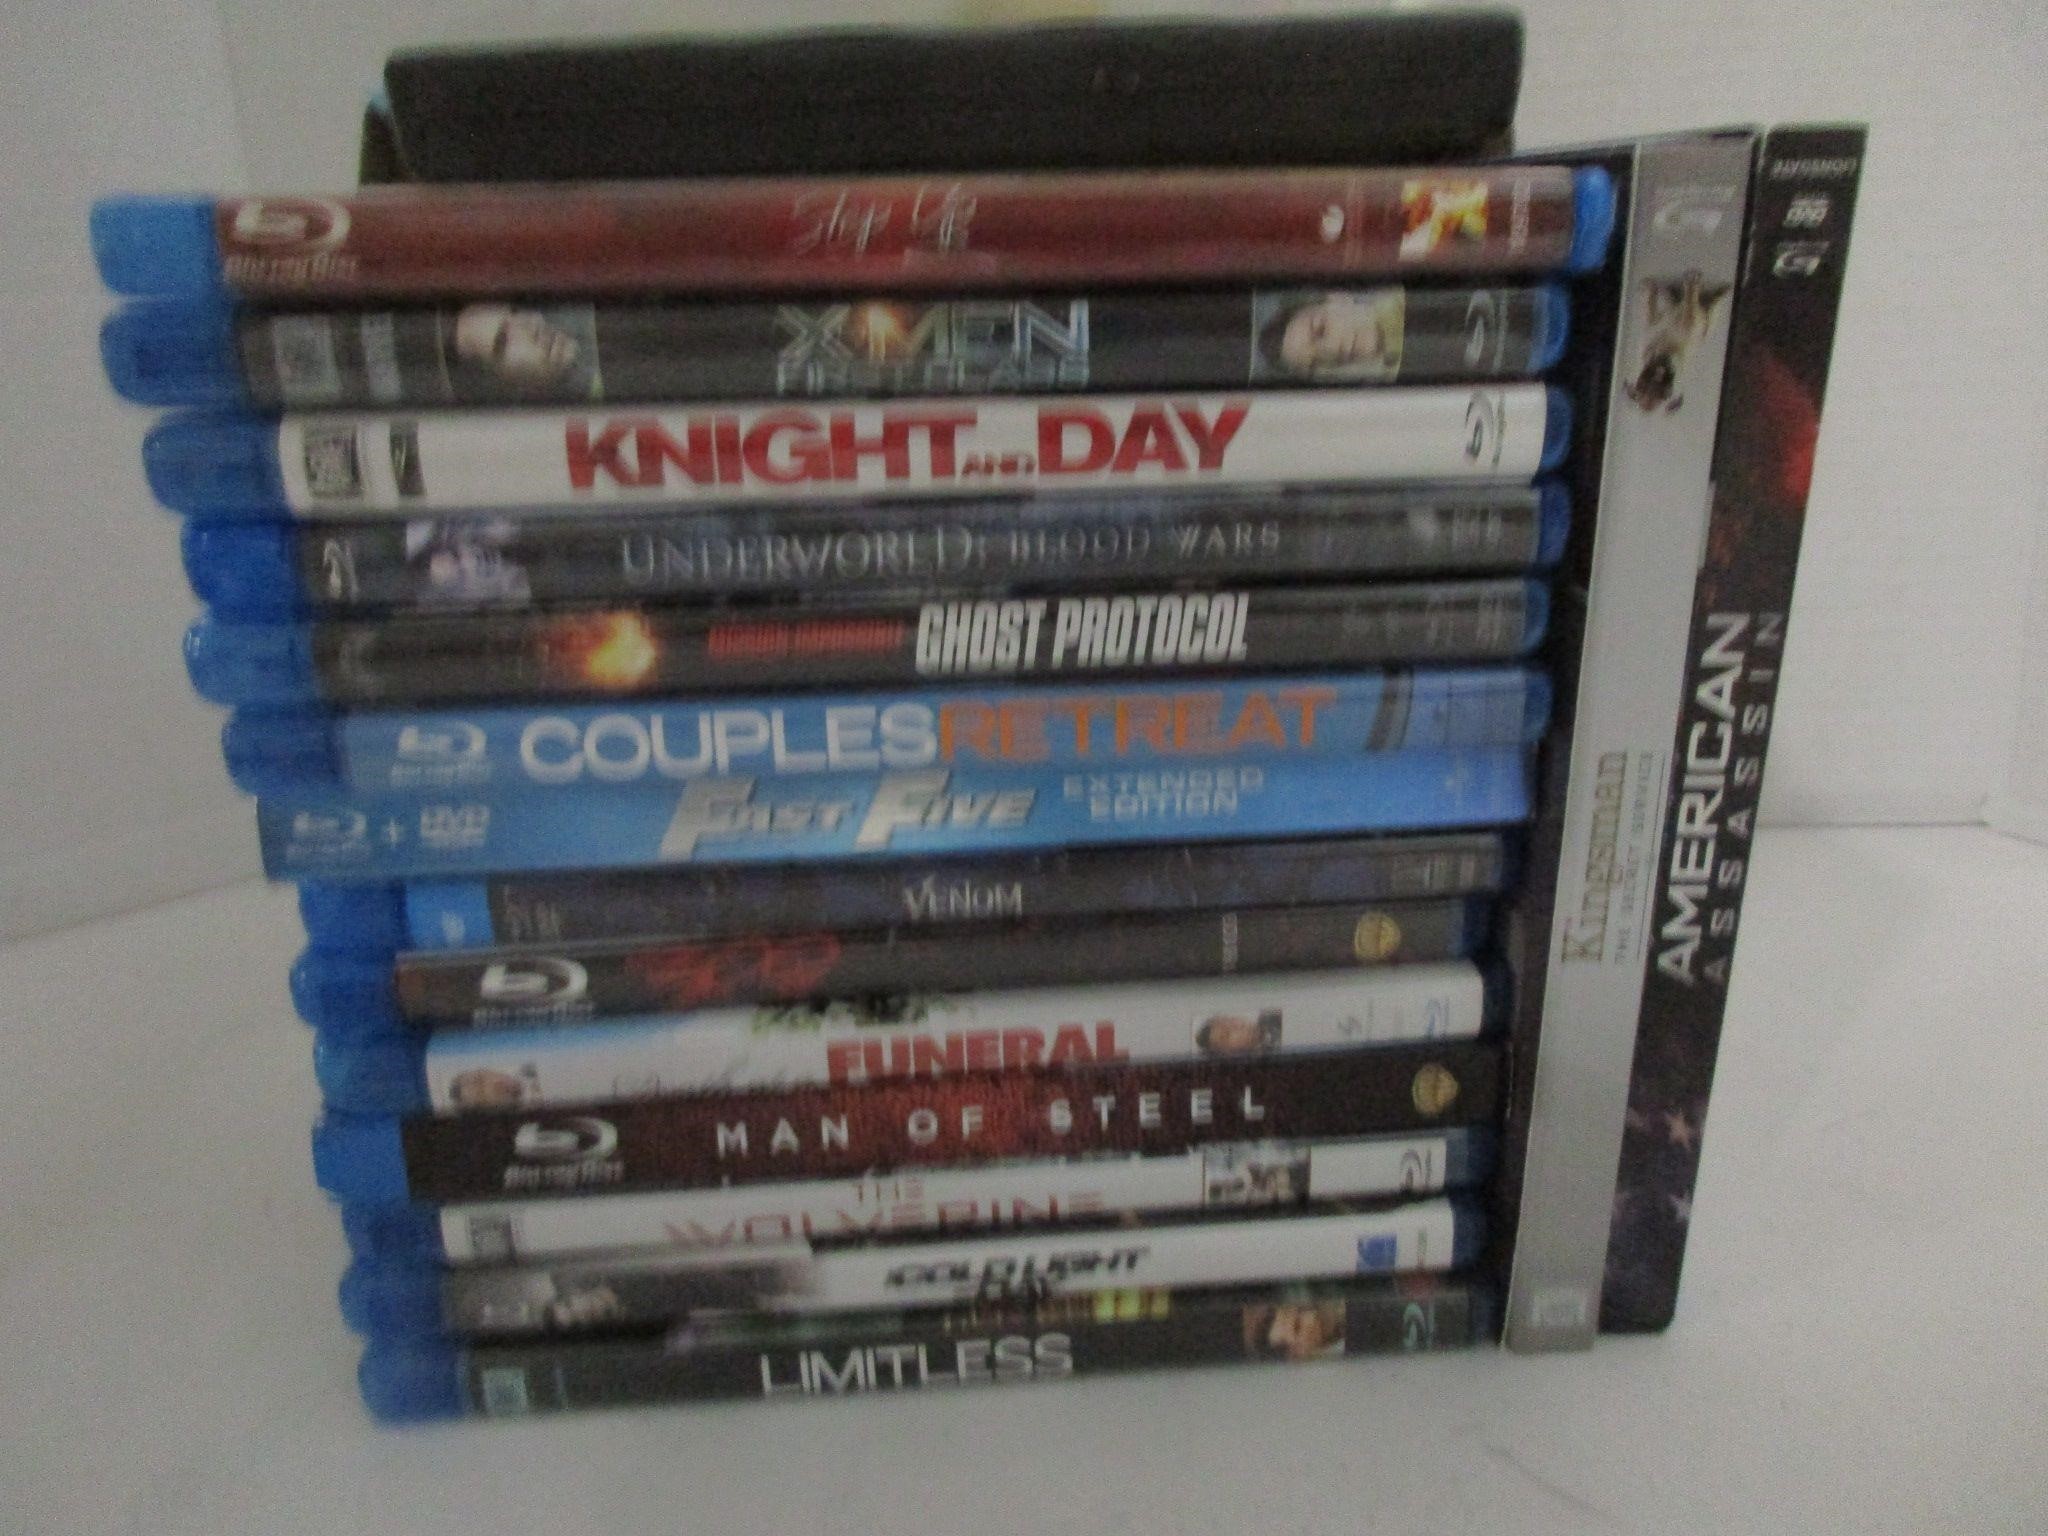 MOVIES Blu-Ray collection